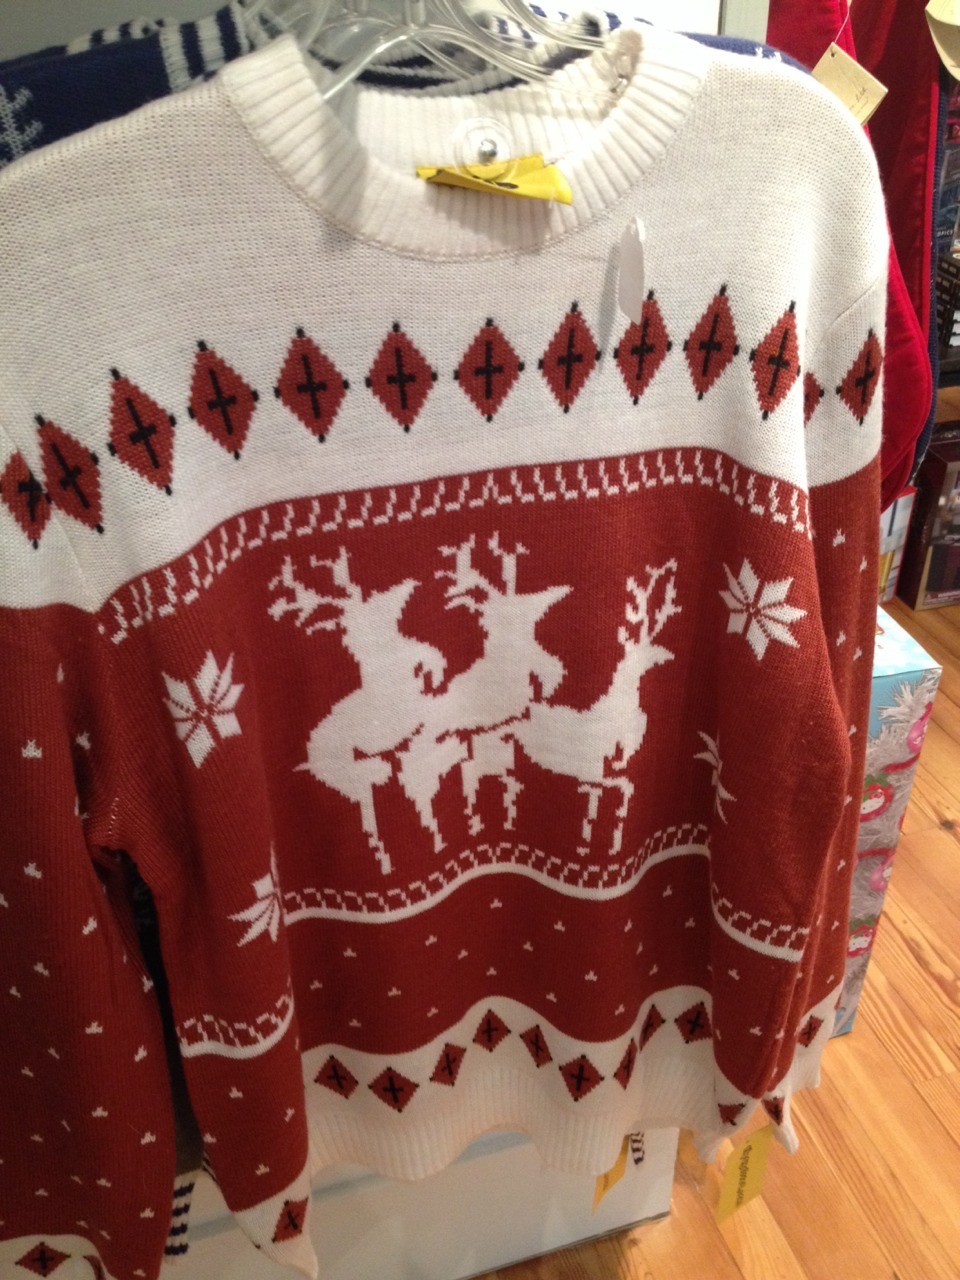 hatos:  I ASKED MY DAD TO BUY ME A CHRISTMAS SWEATER AND HE BOUGHT IT BEFORE HE REALIZED